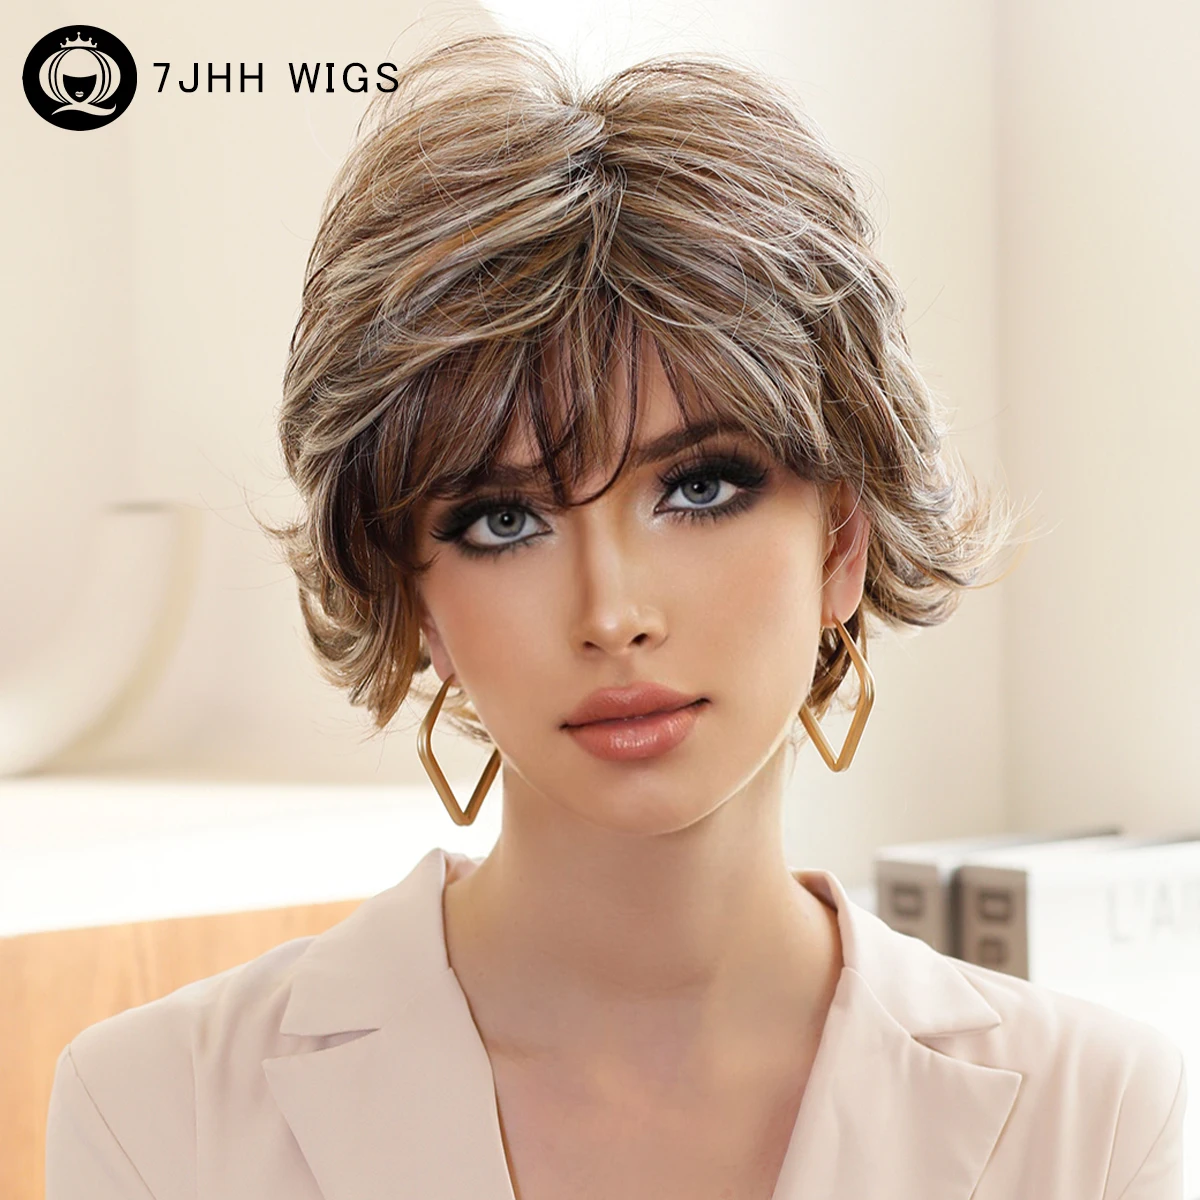 

Honey Blonde Pixie Cut Hair Wigs with Bangs Cute Natural Looking Short Highlighted Blond Brown Layered Wavy Hair Wigs for Women